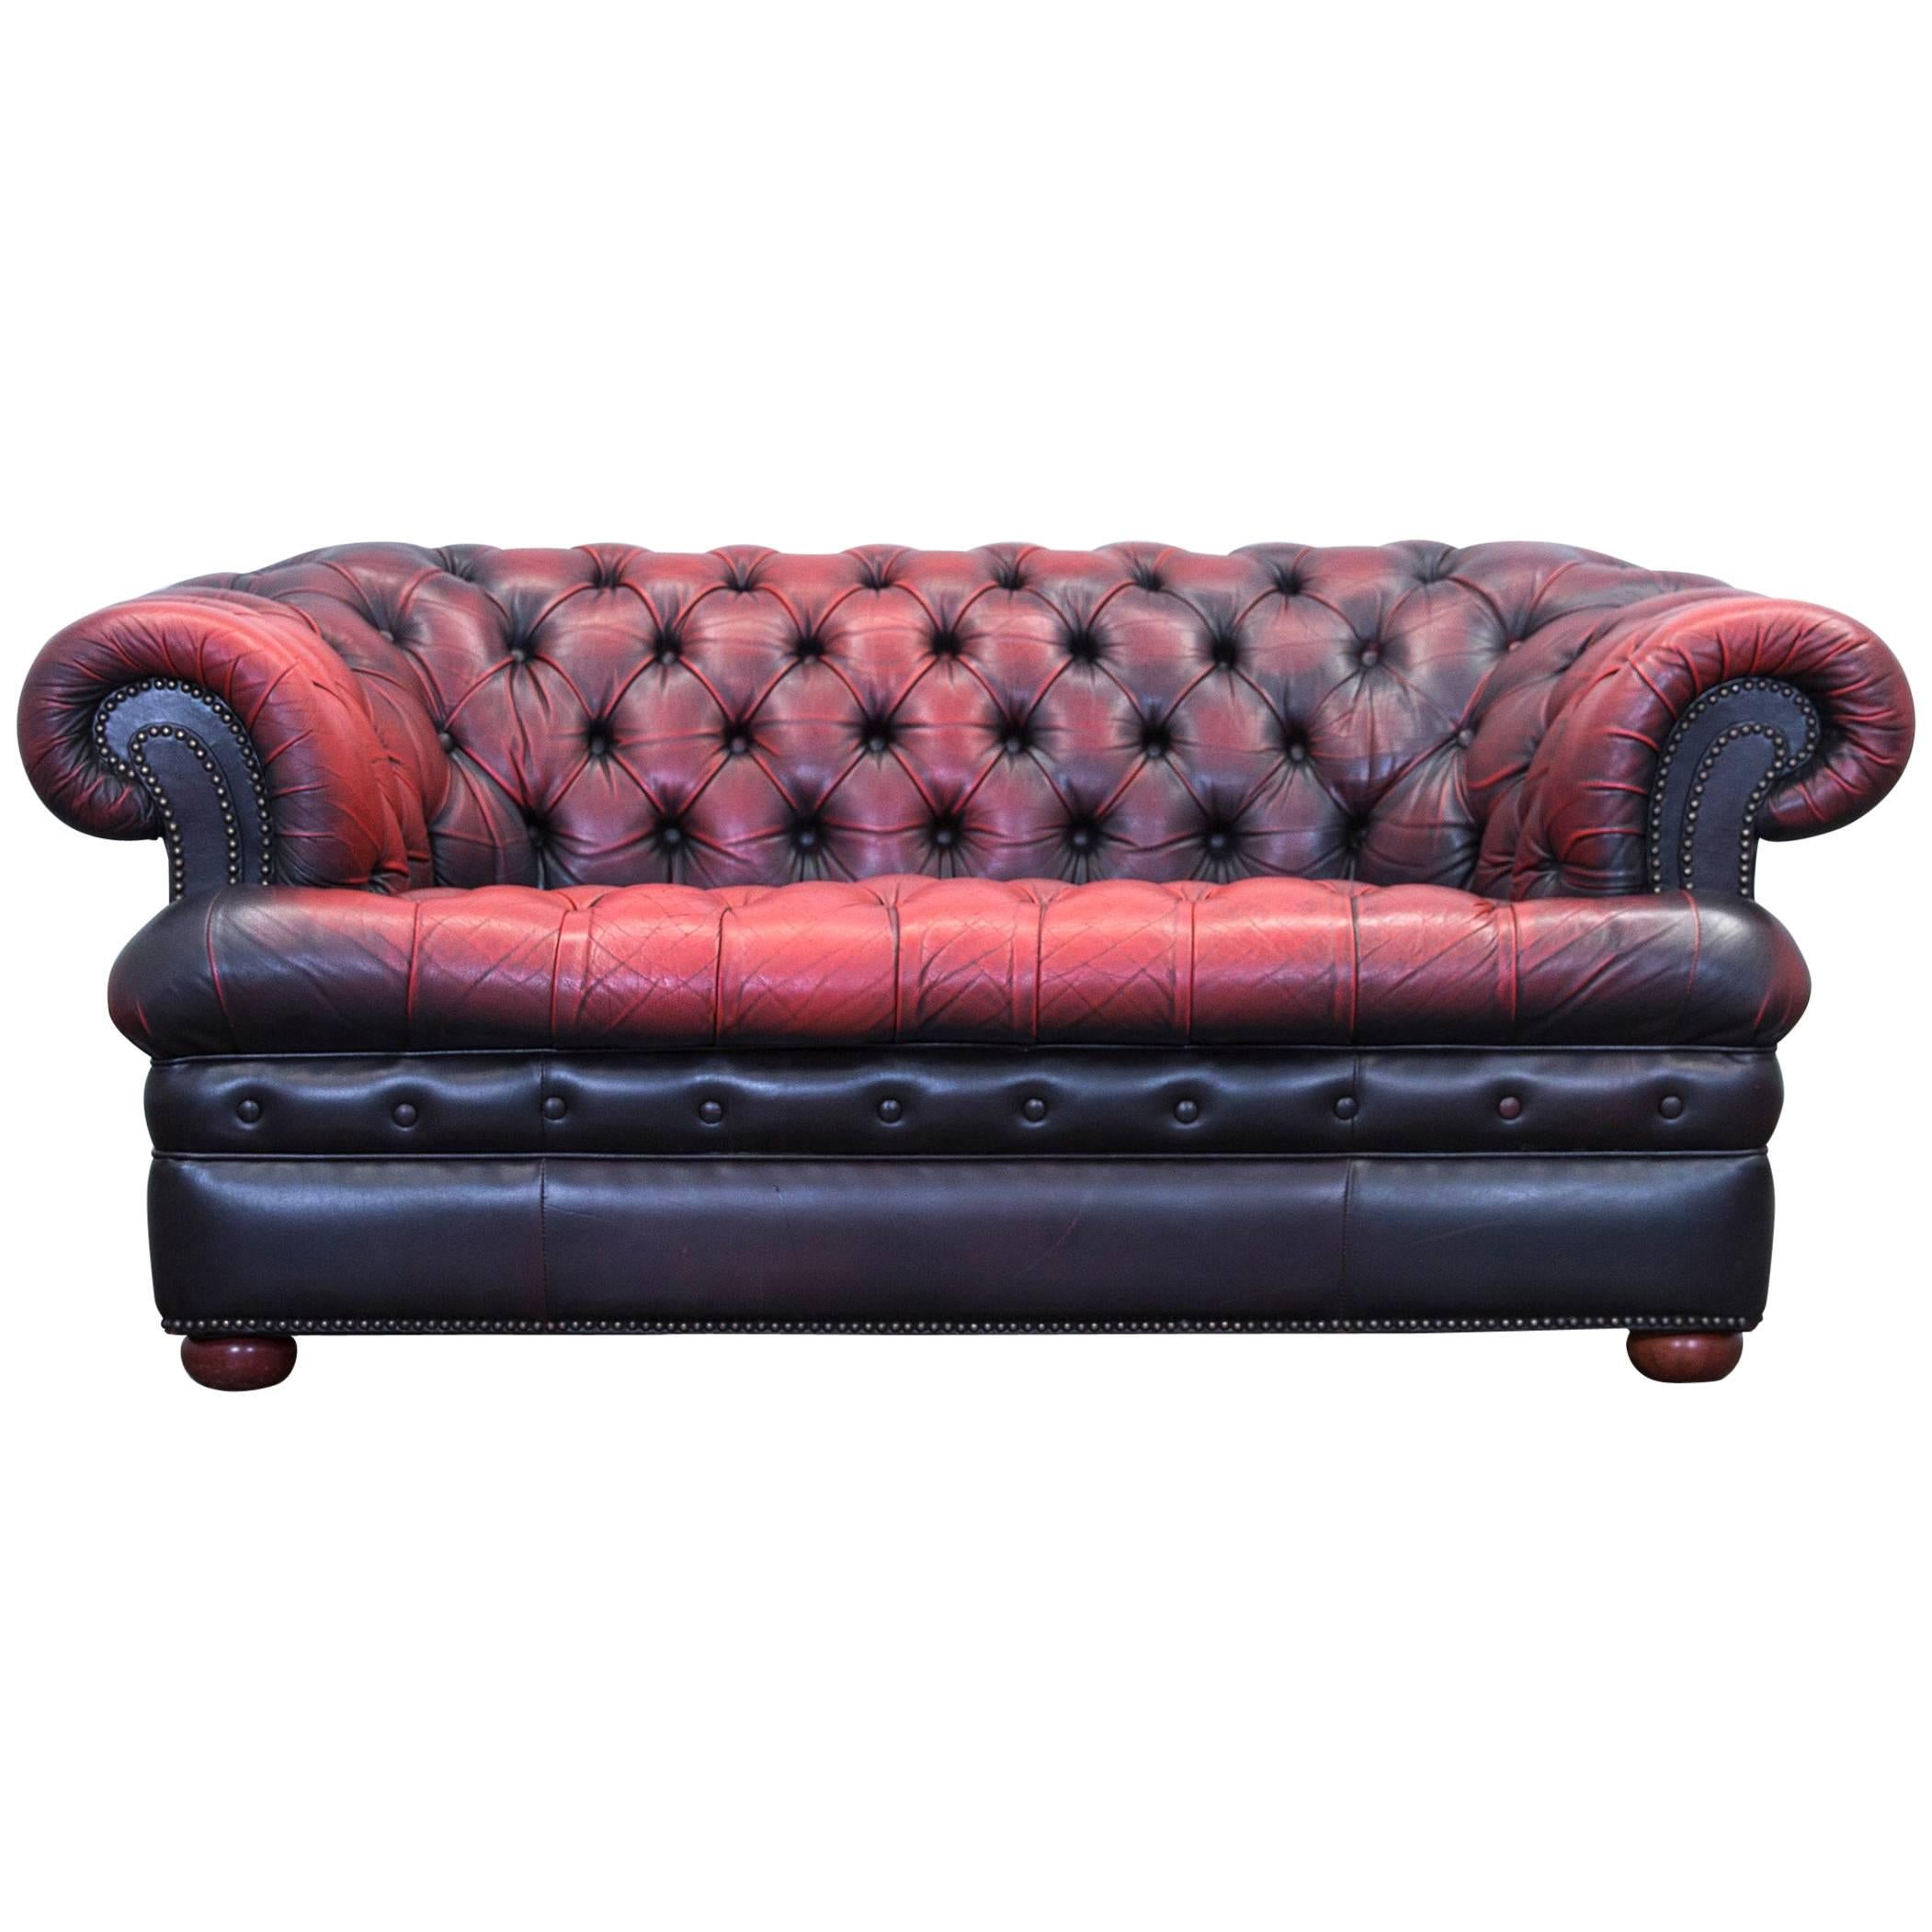 Chesterfield Sofa Leather Red Brown Three-Seat Couch Retro Vintage